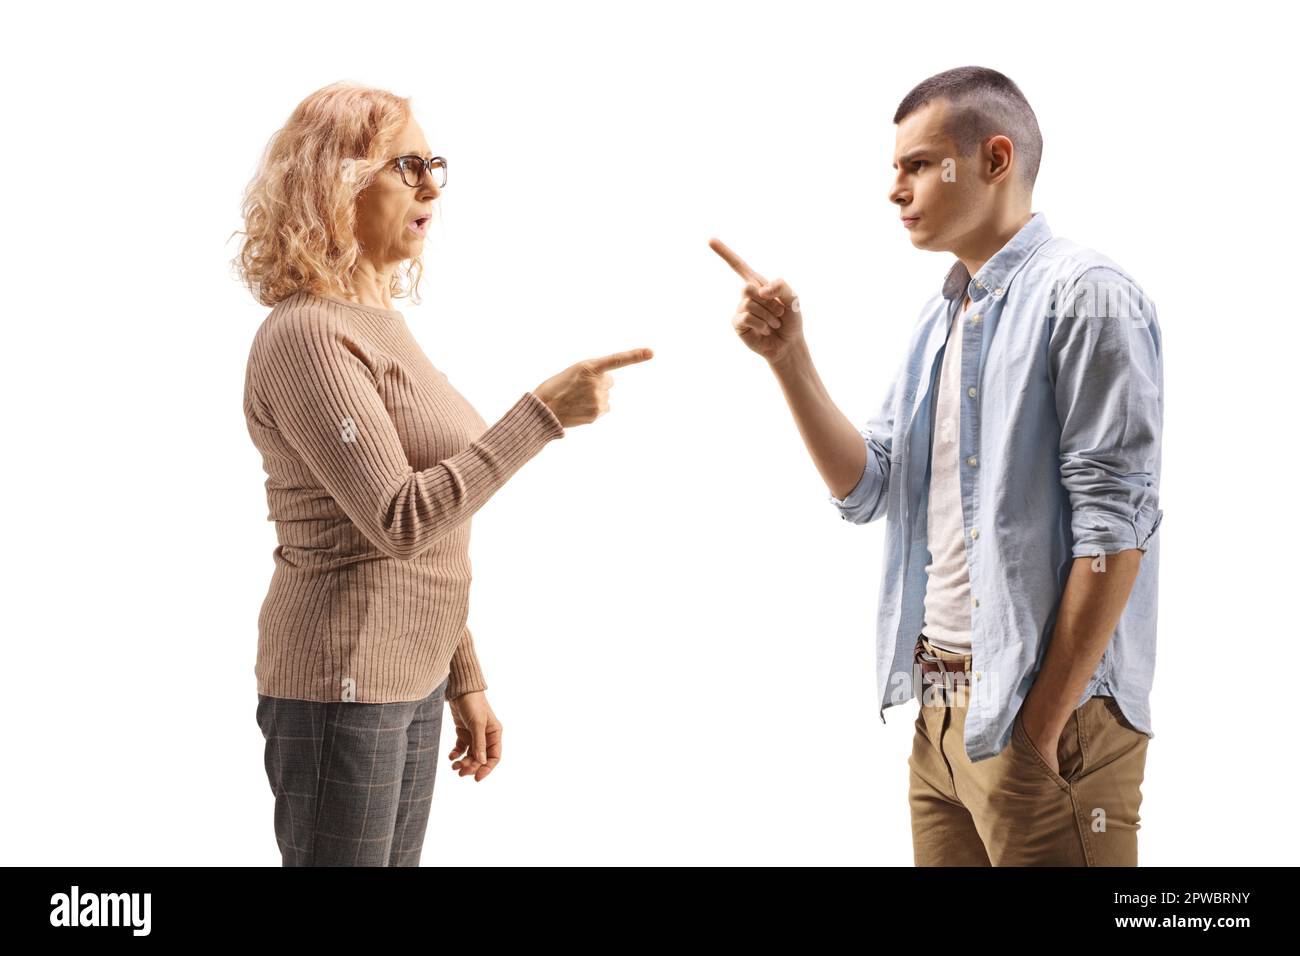 Mother and son having an argument isolated on white background Stock Photo